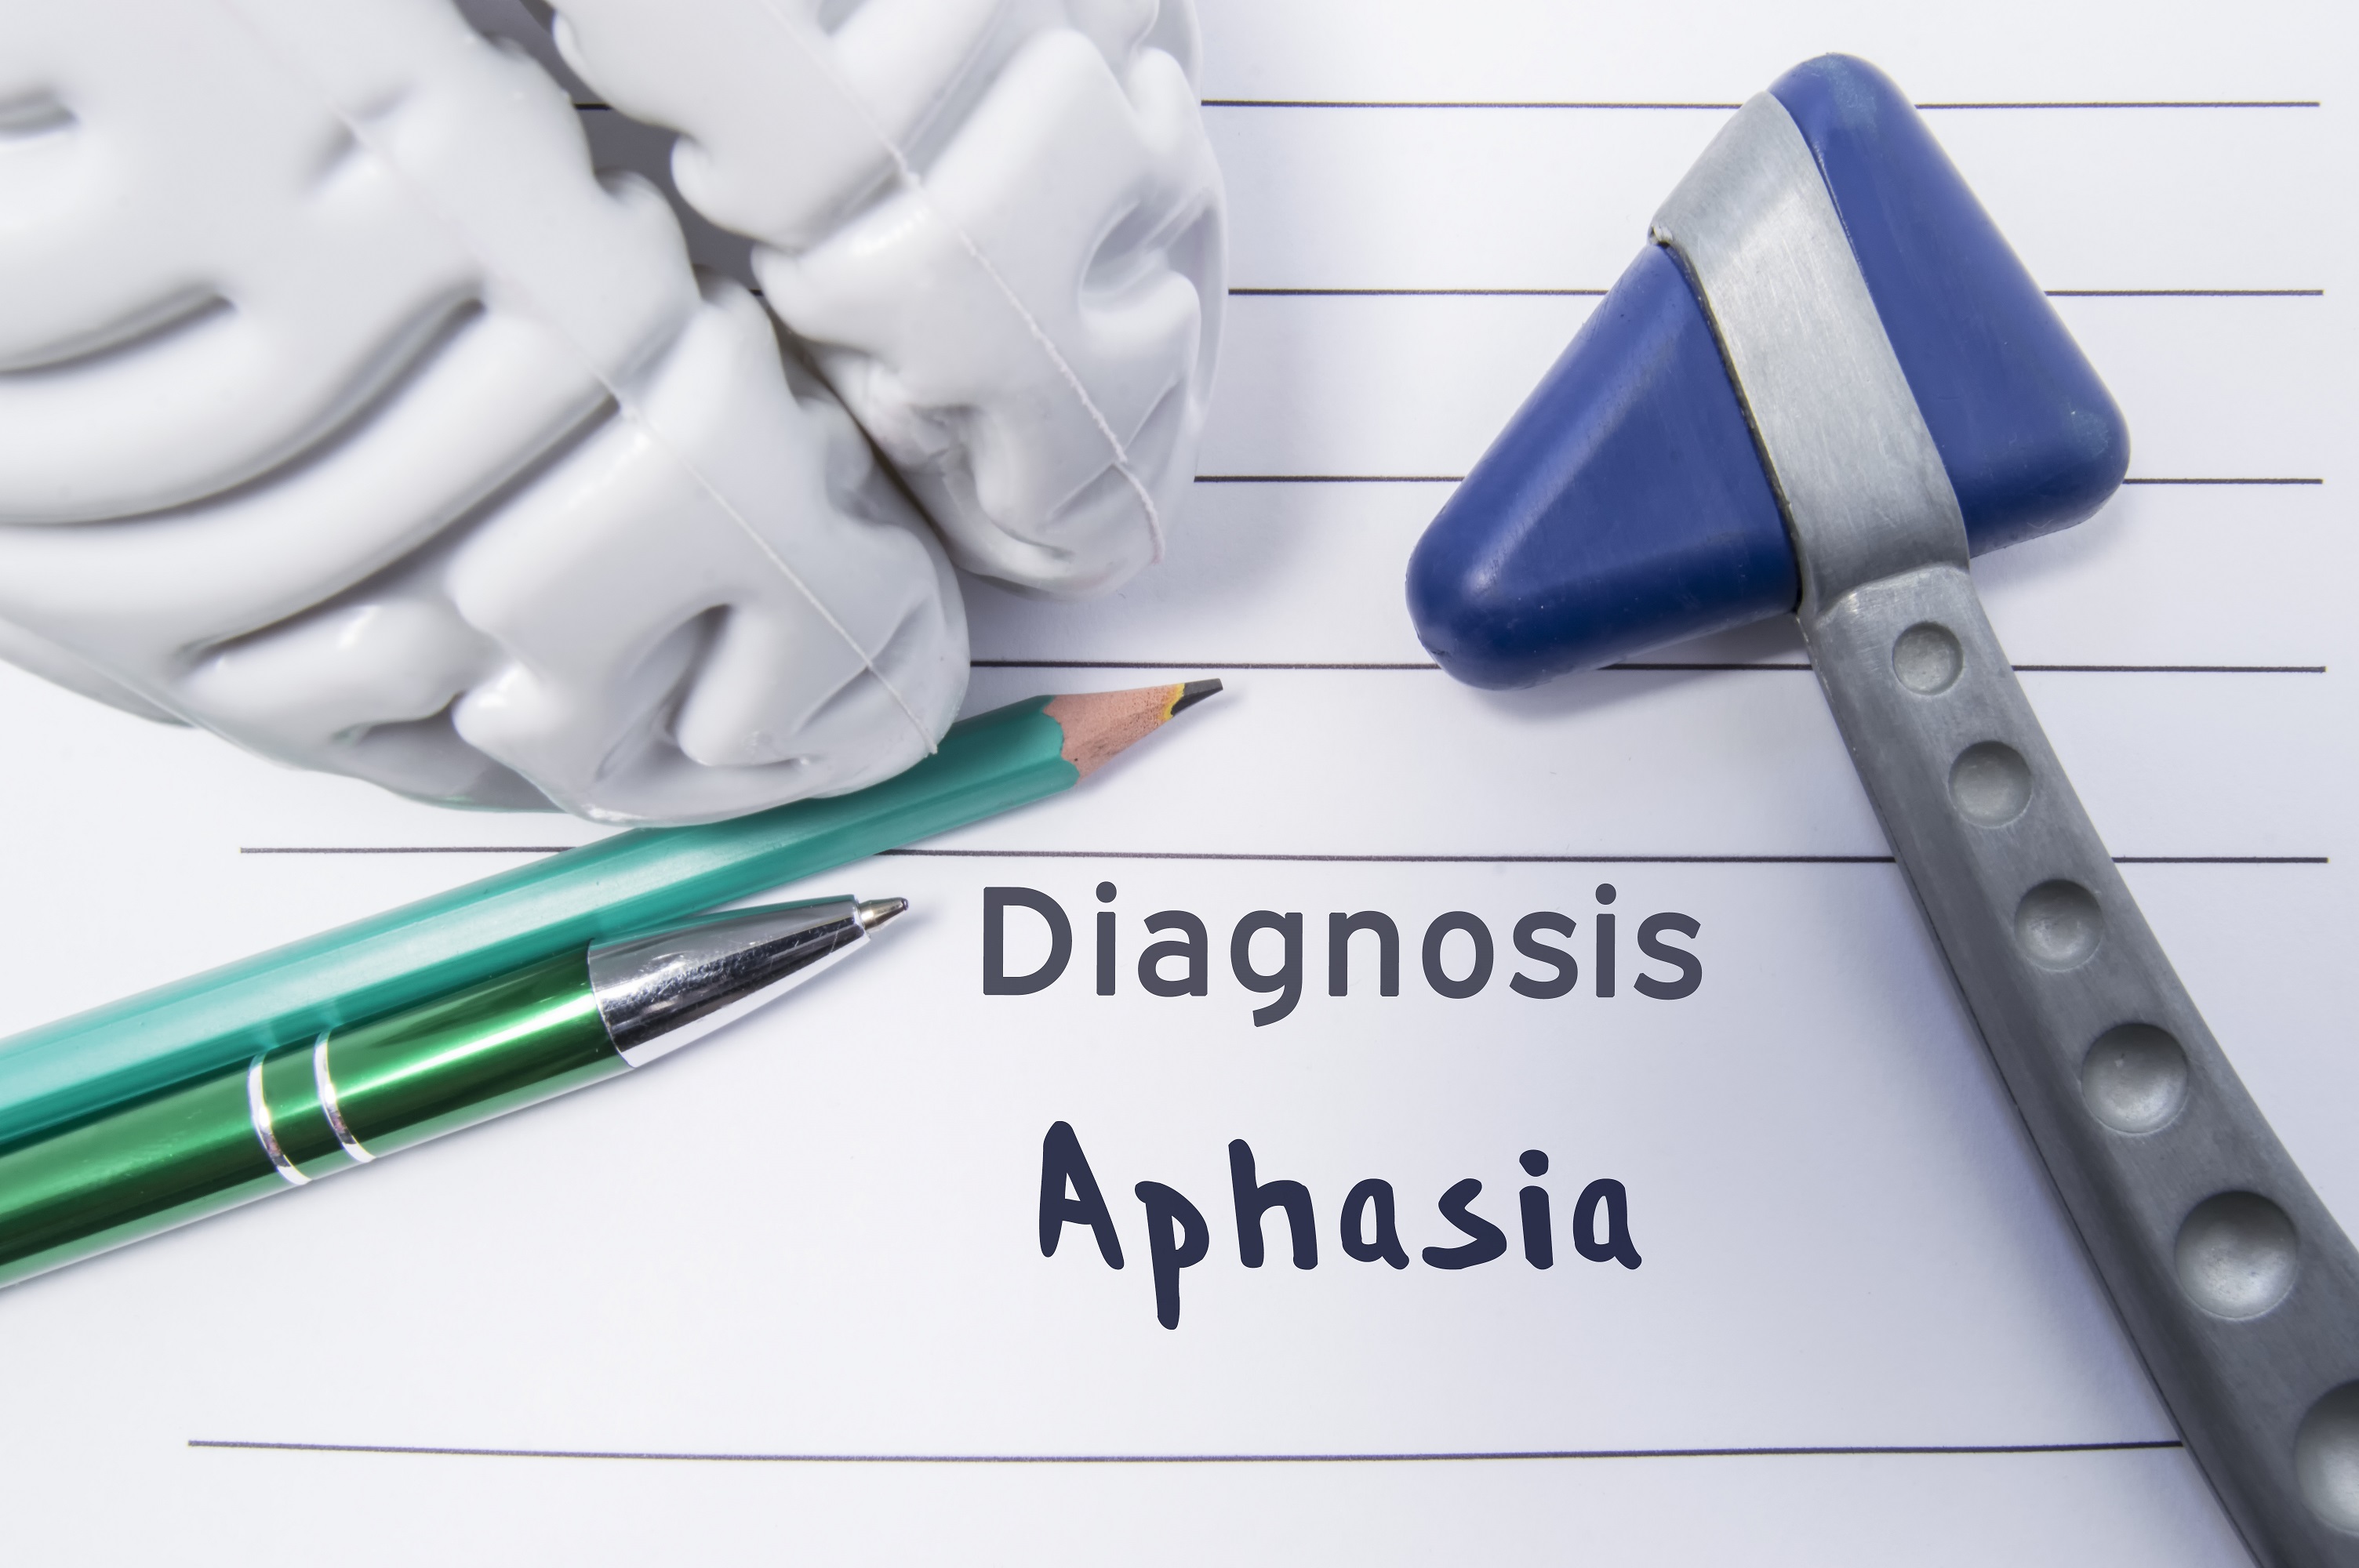 Can Speech Therapy Help with Aphasia?